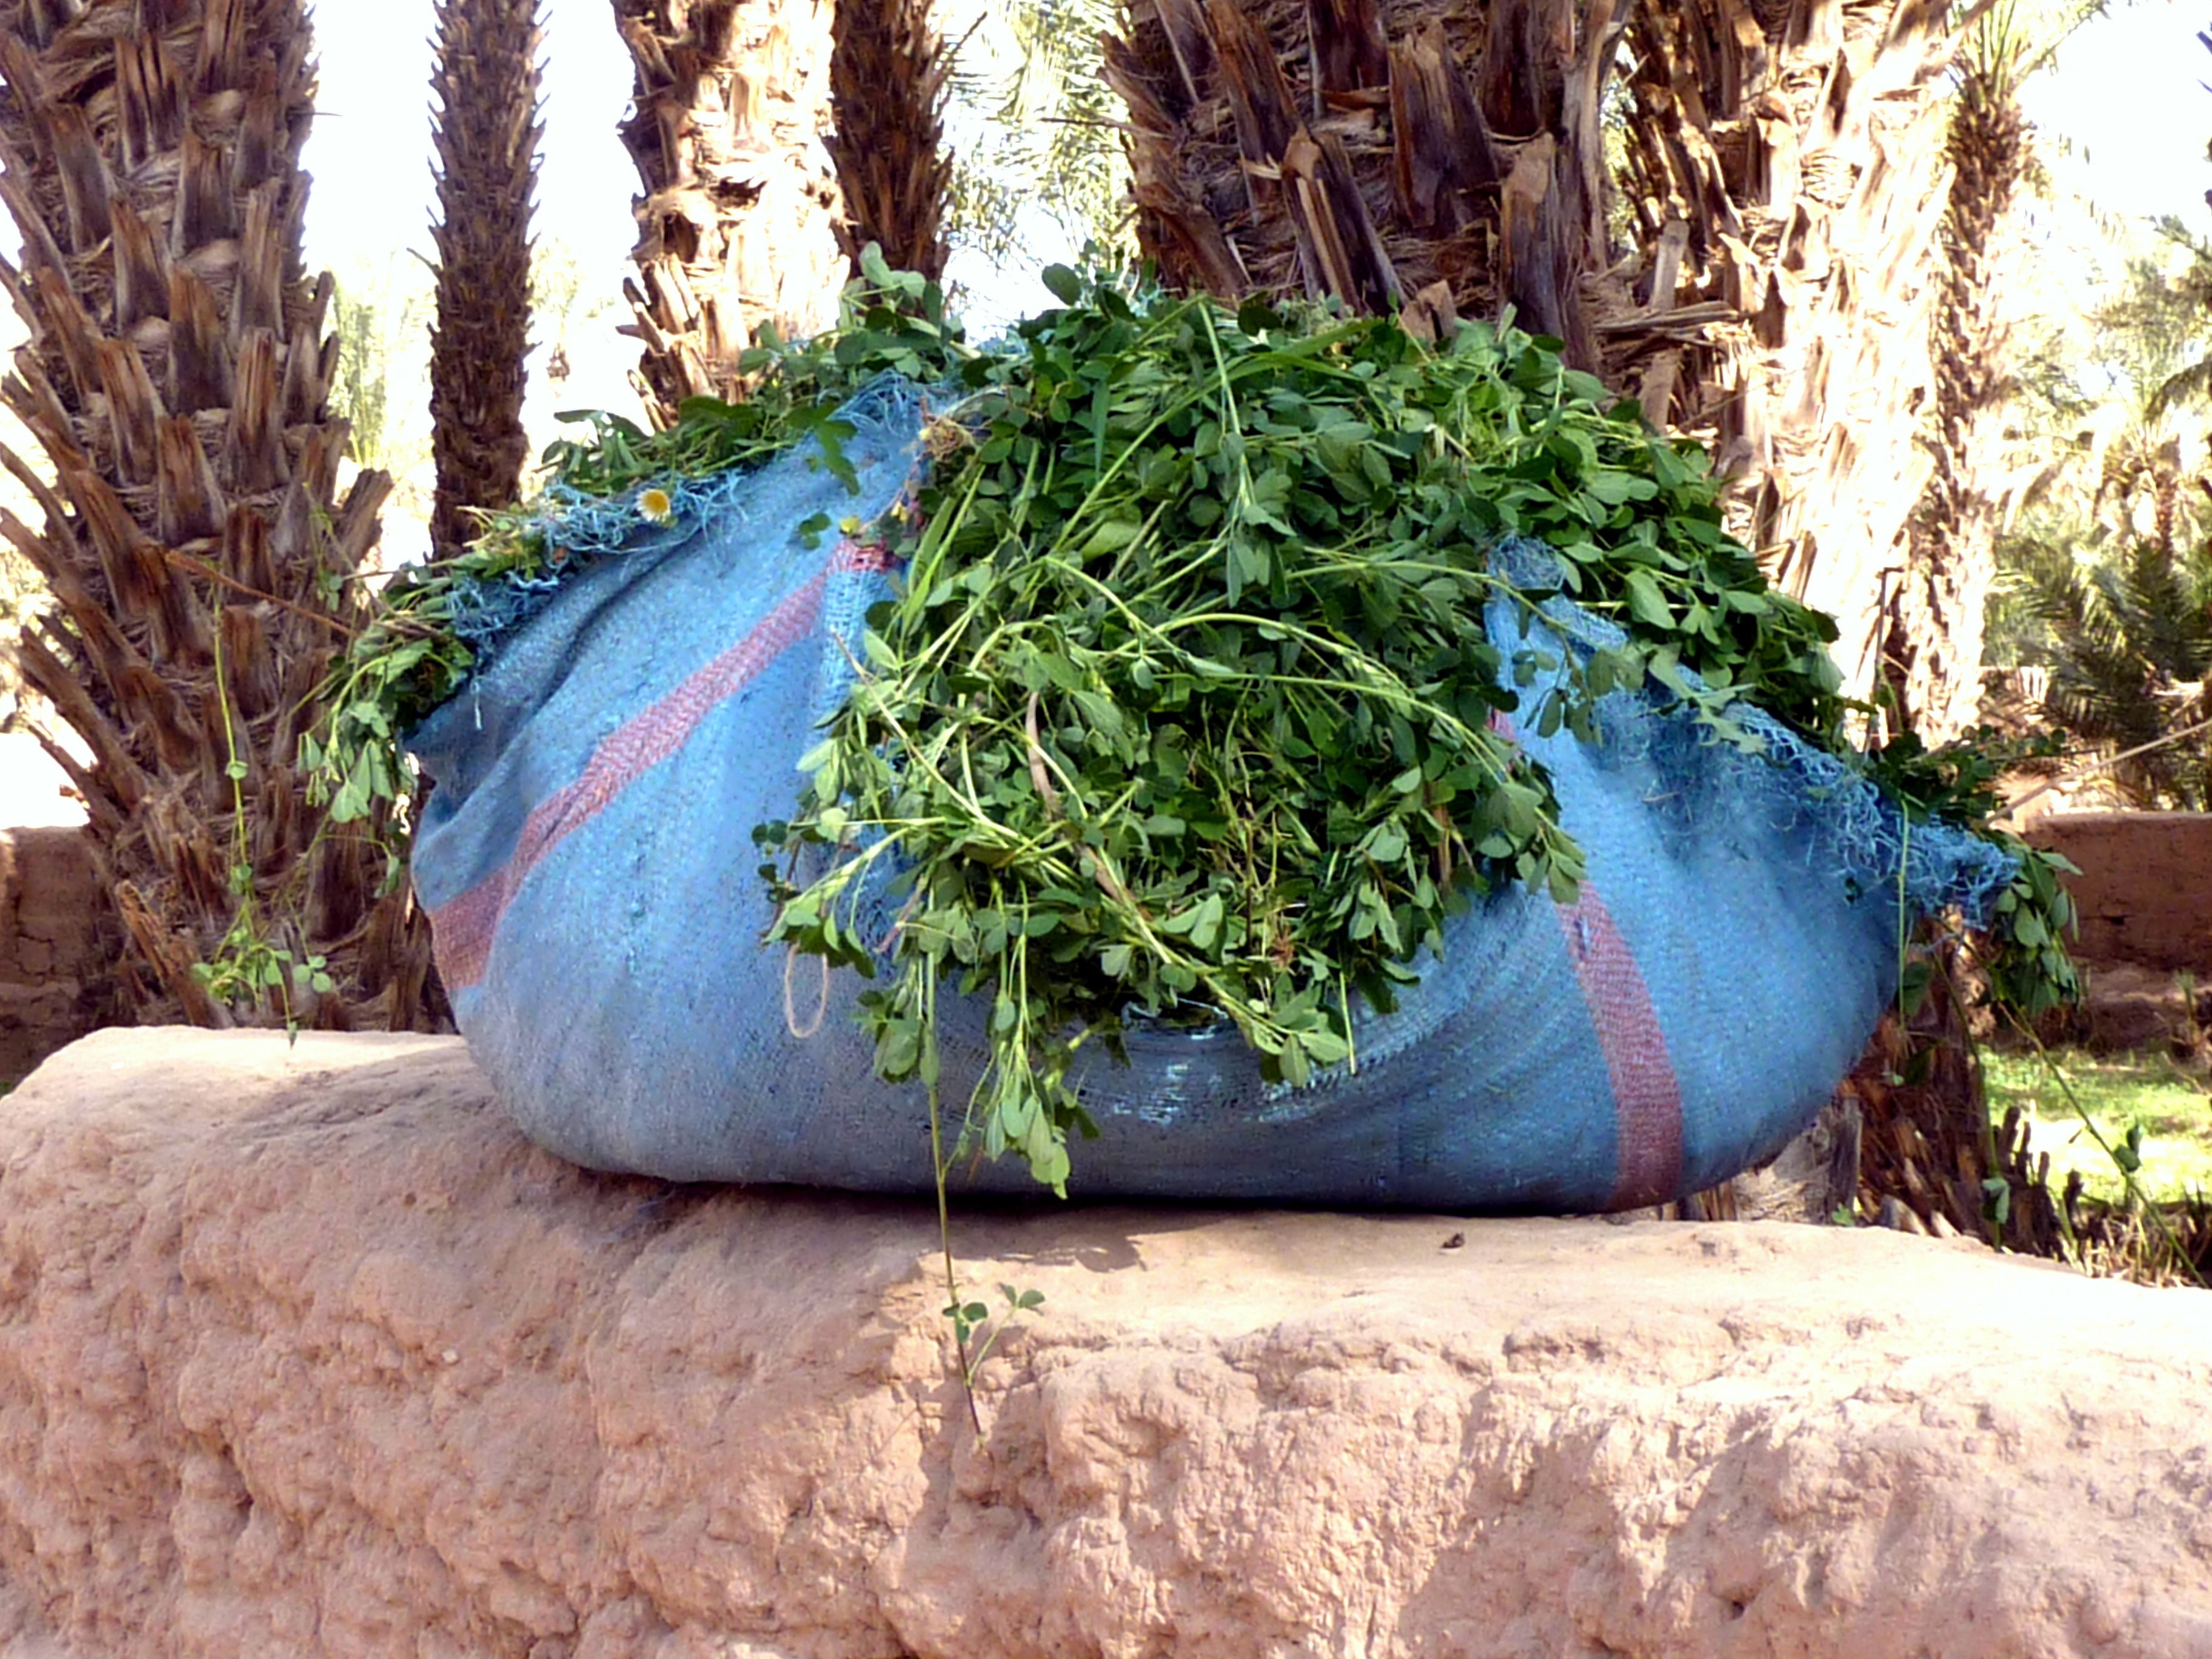 green leafed plant in blue sack